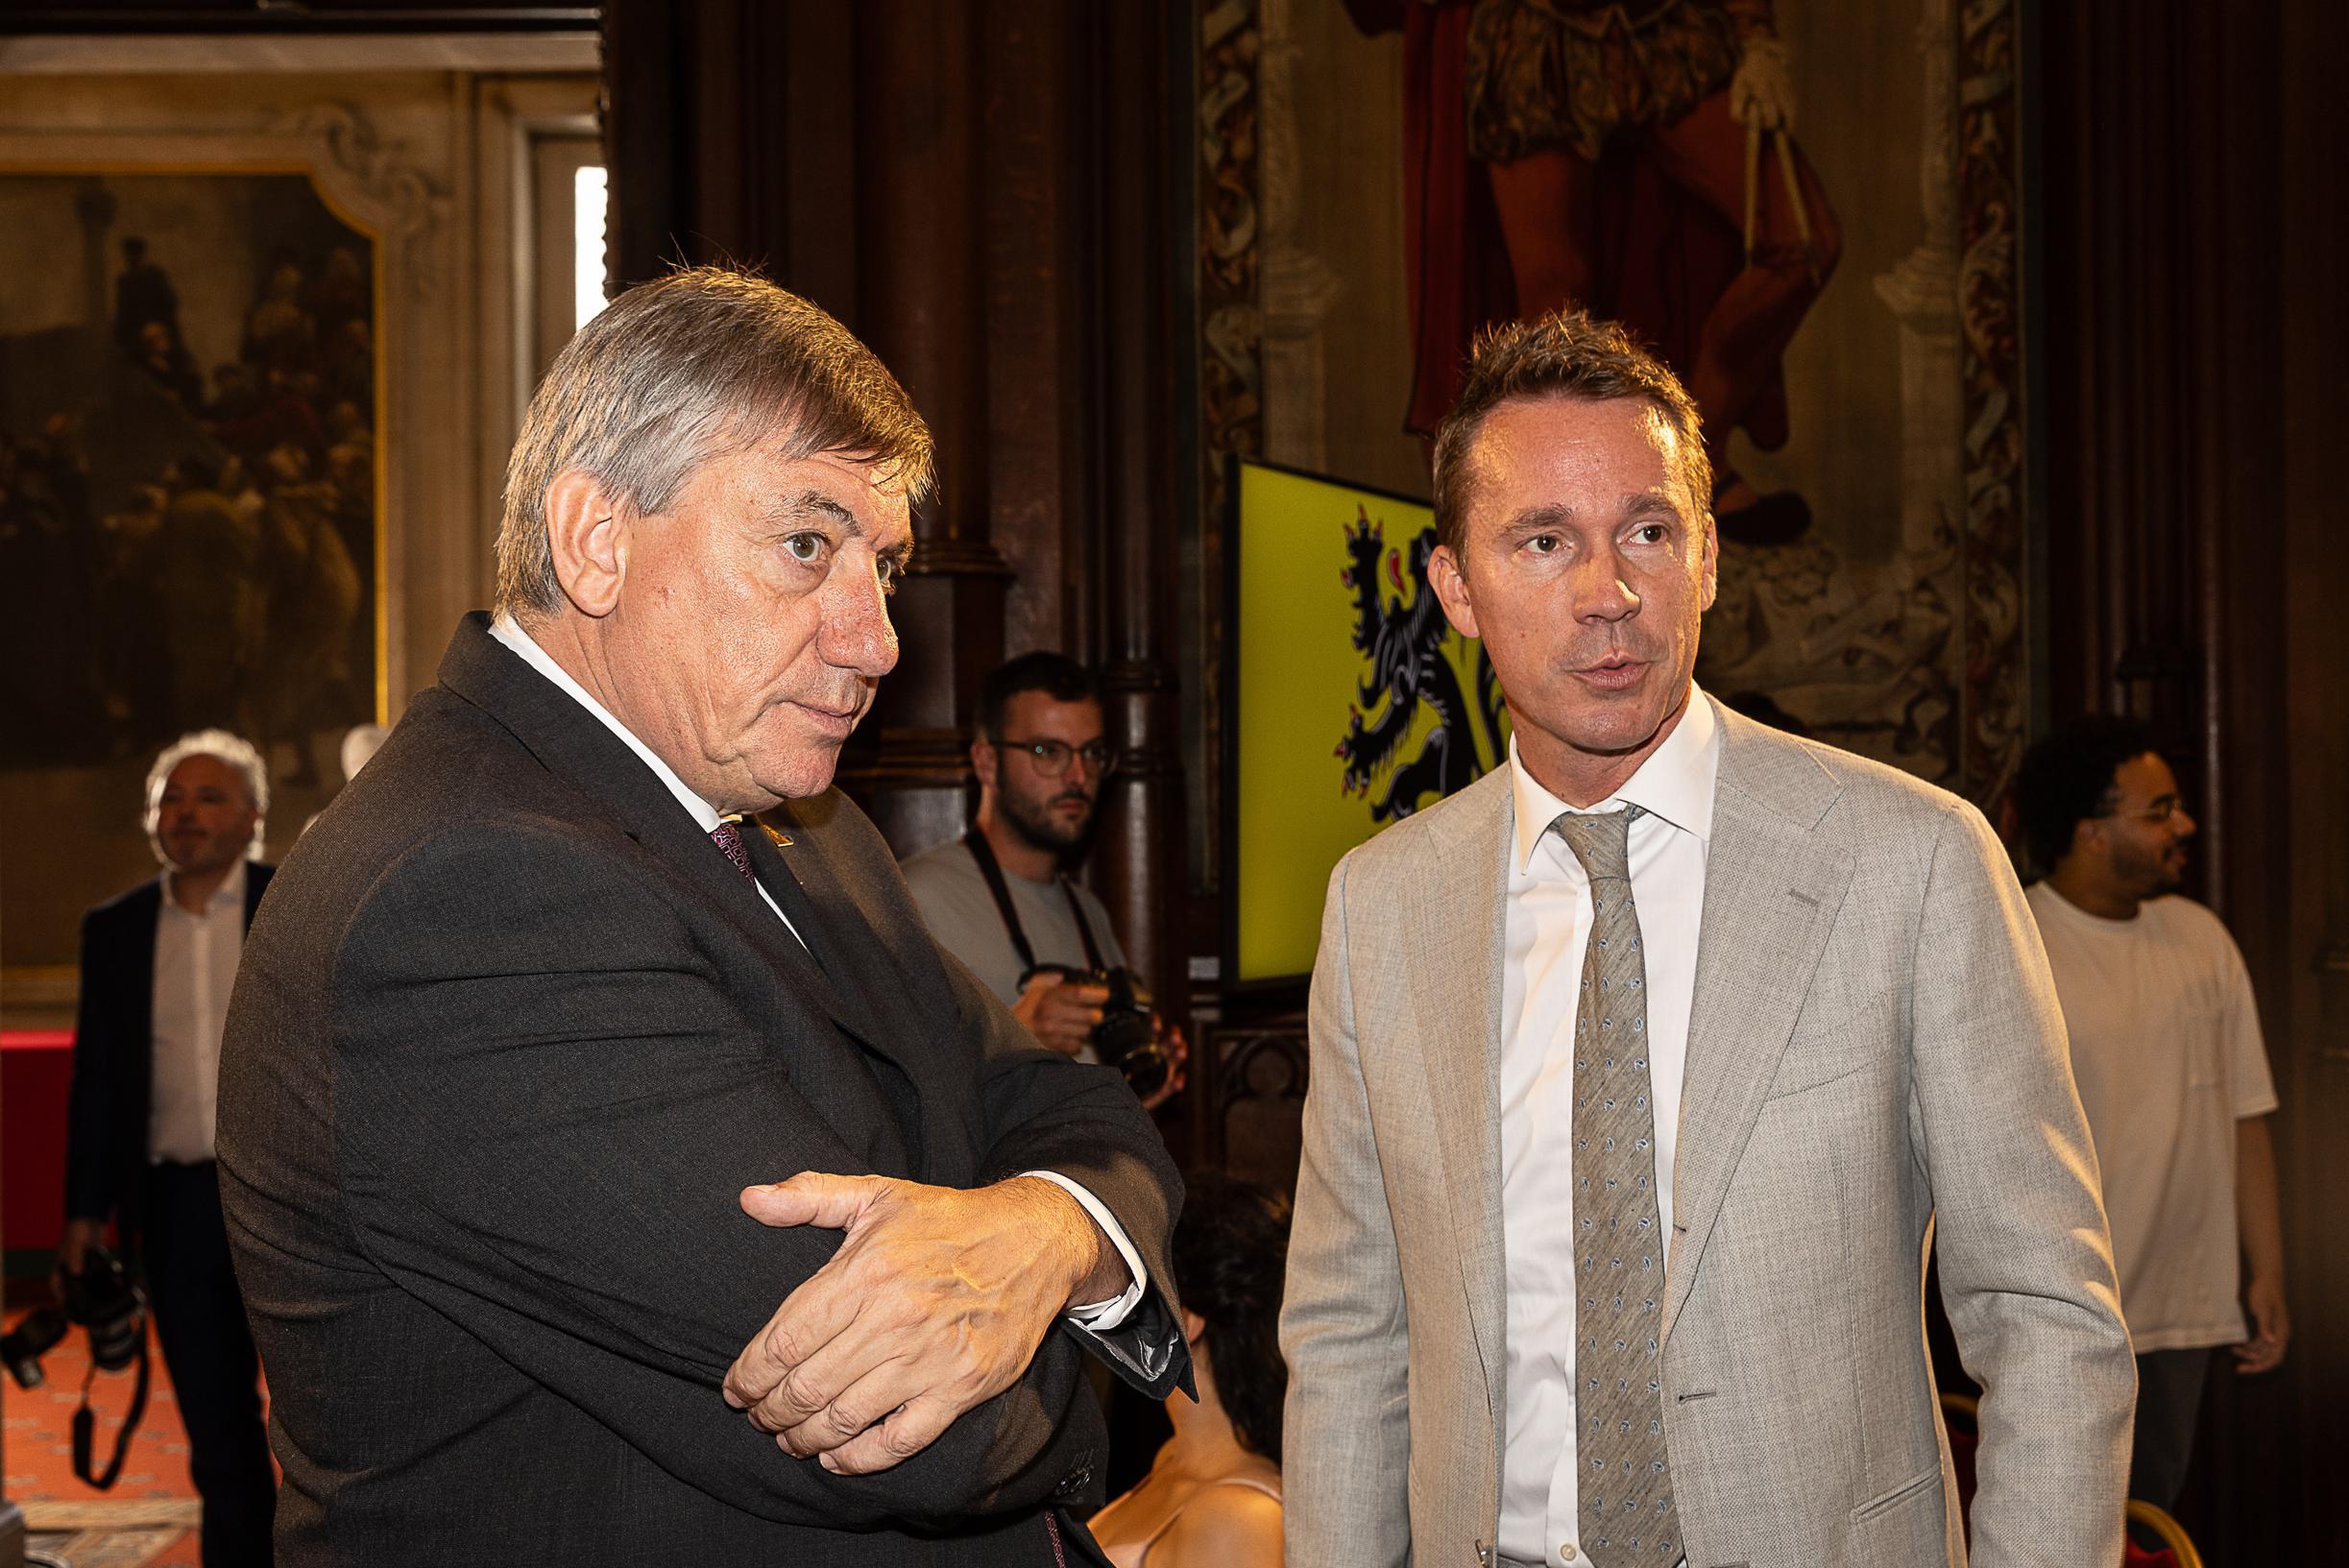 Jambon and Brouns Join Van Hool, Unions, and Banks at Negotiation Table: A Fight Worth Having